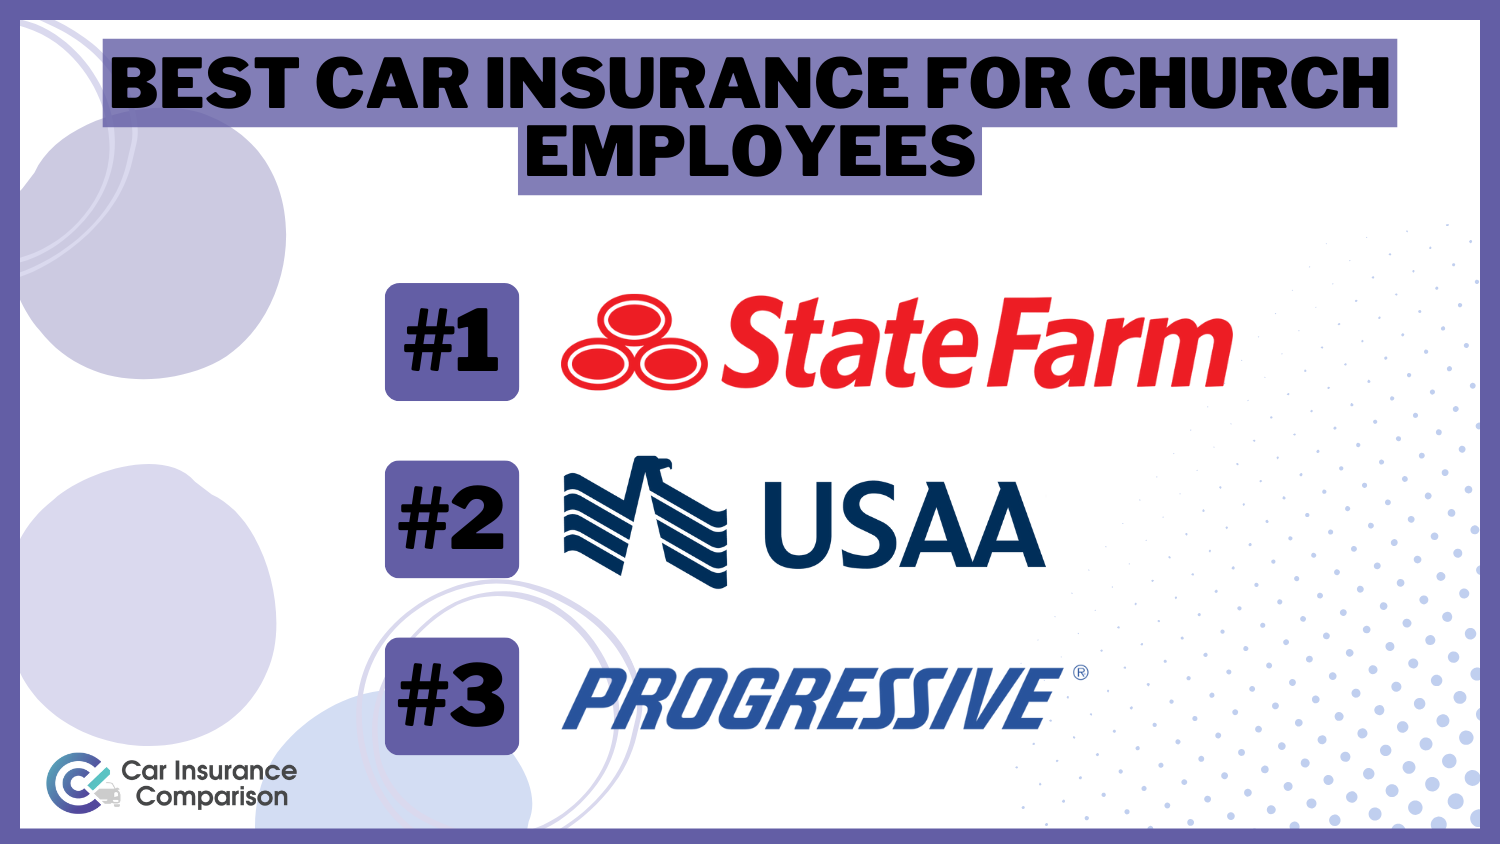 Best Car Insurance for Church Employees: State Farm, USAA, and Progressive